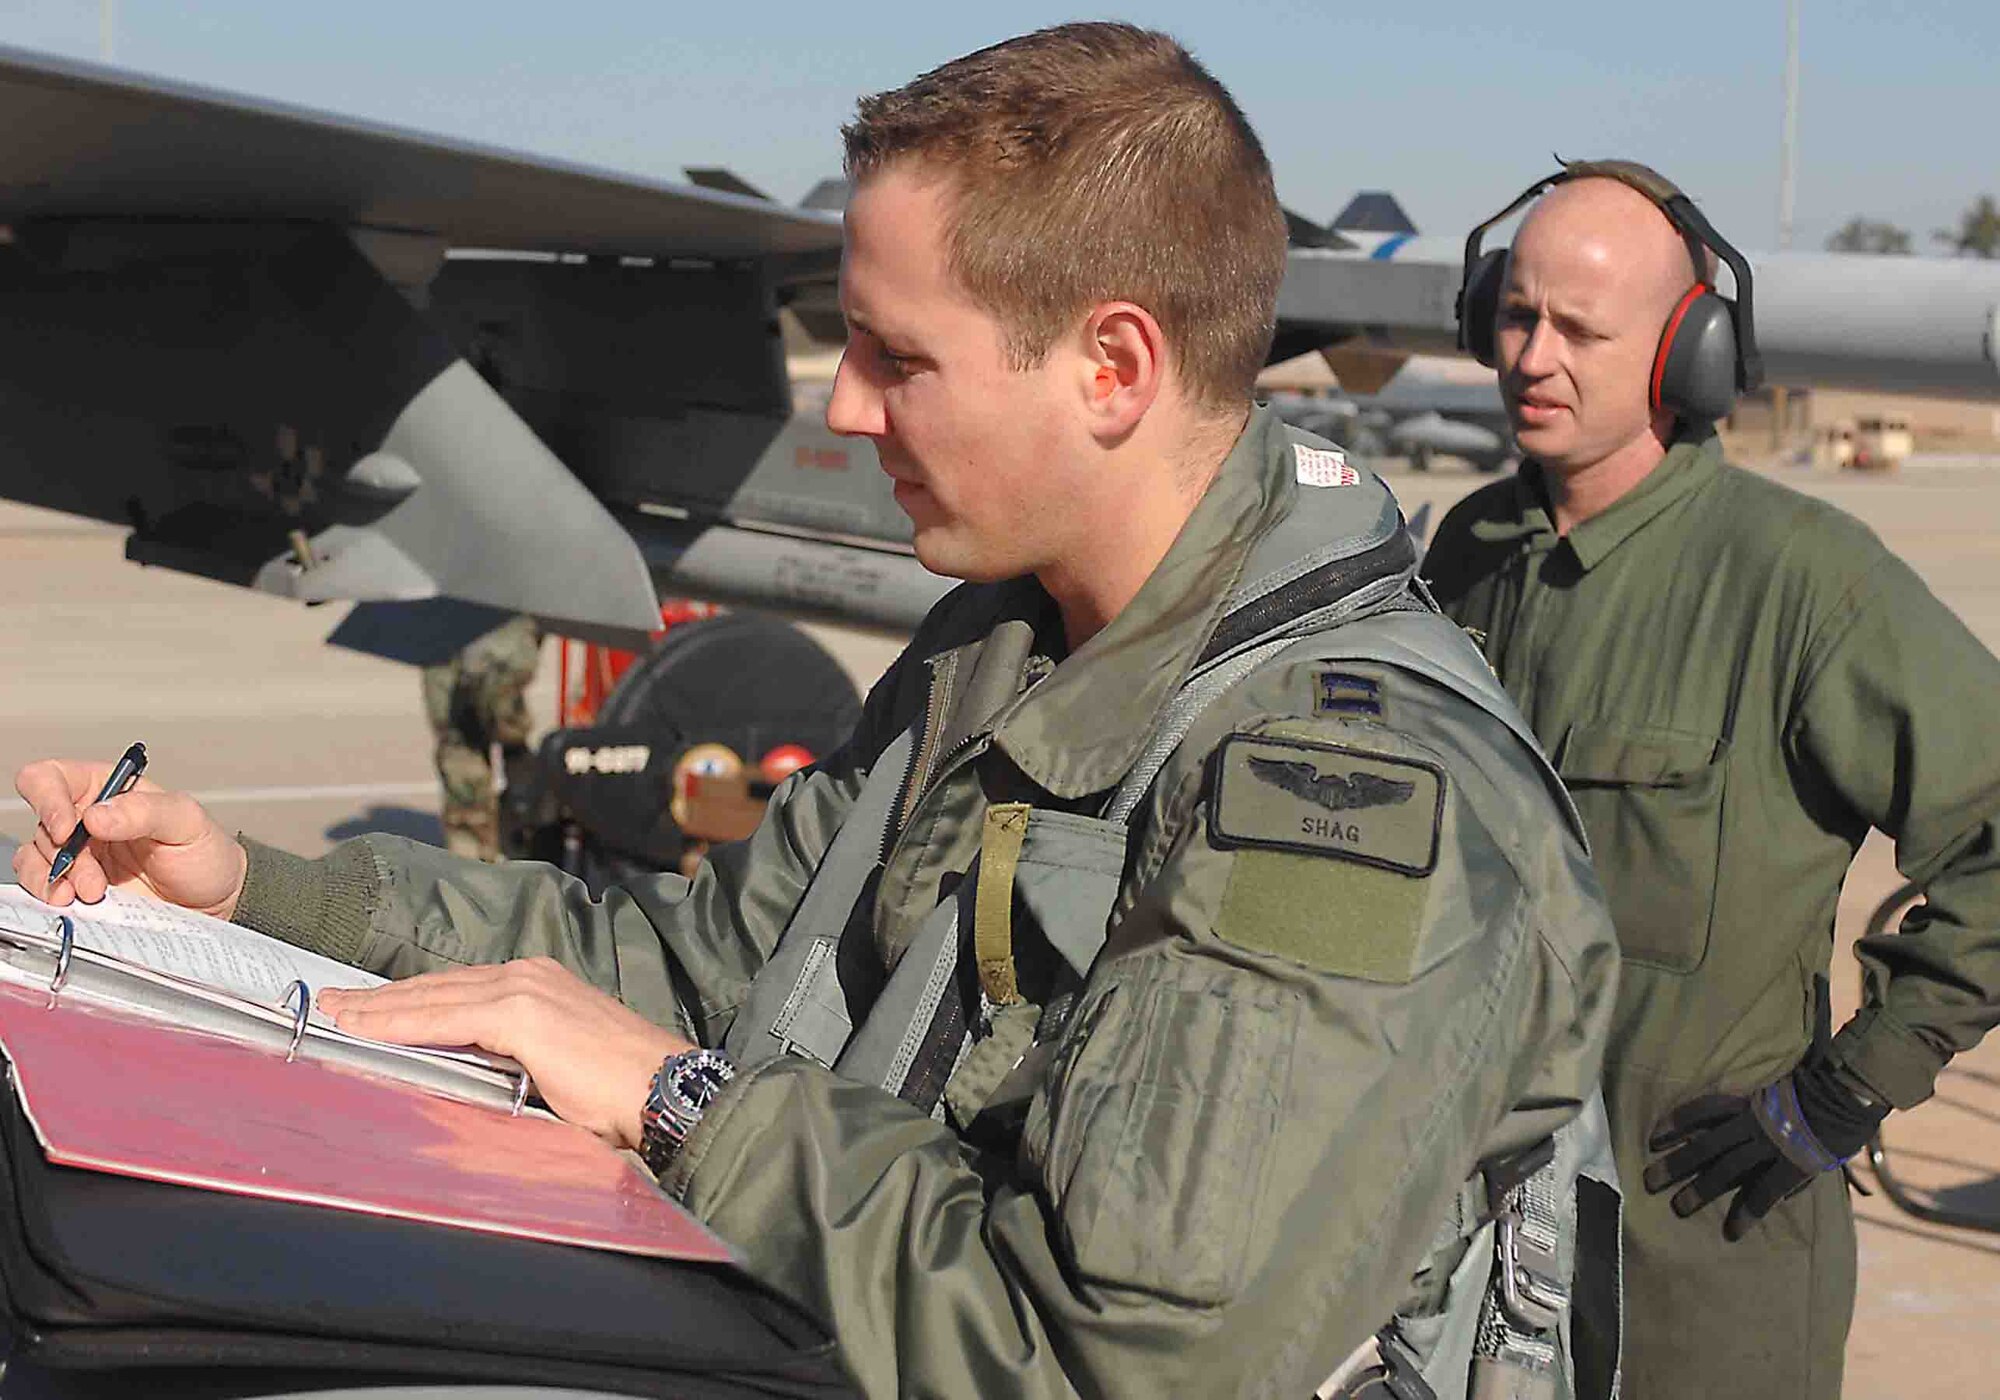 SHAW AIR FORCE BASE, S.C. -- Capt. Todd Adams (left) and Staff Sgt. Donald Dunn , 77th Fighter Squadron, prepare for an Operation Iron Thunder flight Feb. 7. Iron Thunder is a four-day excercise that prepares Airmen for operations while deployed. (U.S. Air Force Photo/Airman 1st Class Matthew Davis)